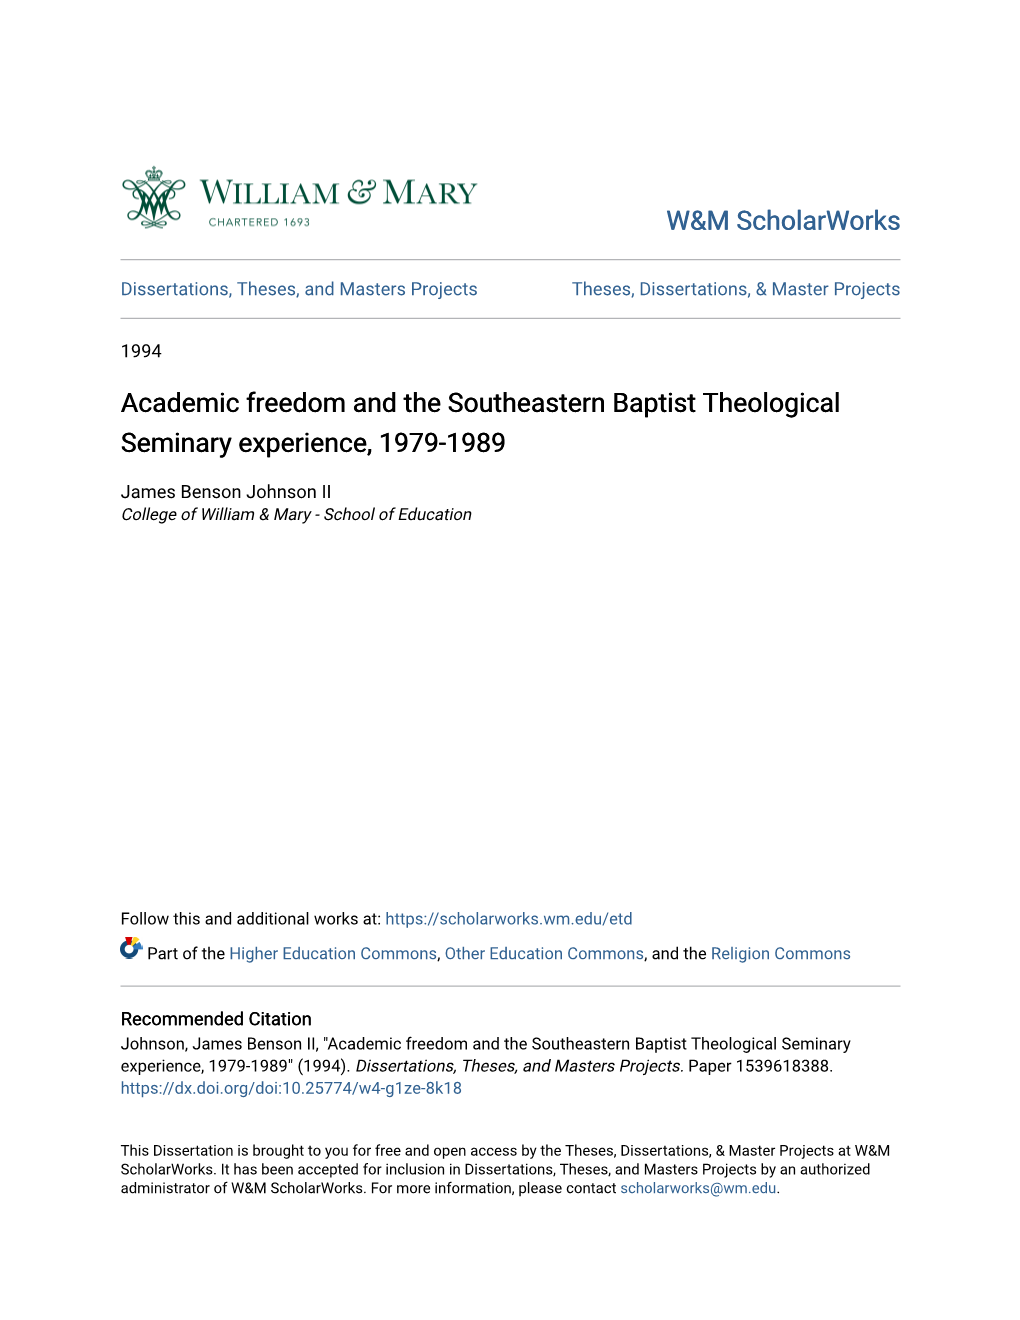 Academic Freedom and the Southeastern Baptist Theological Seminary Experience, 1979-1989